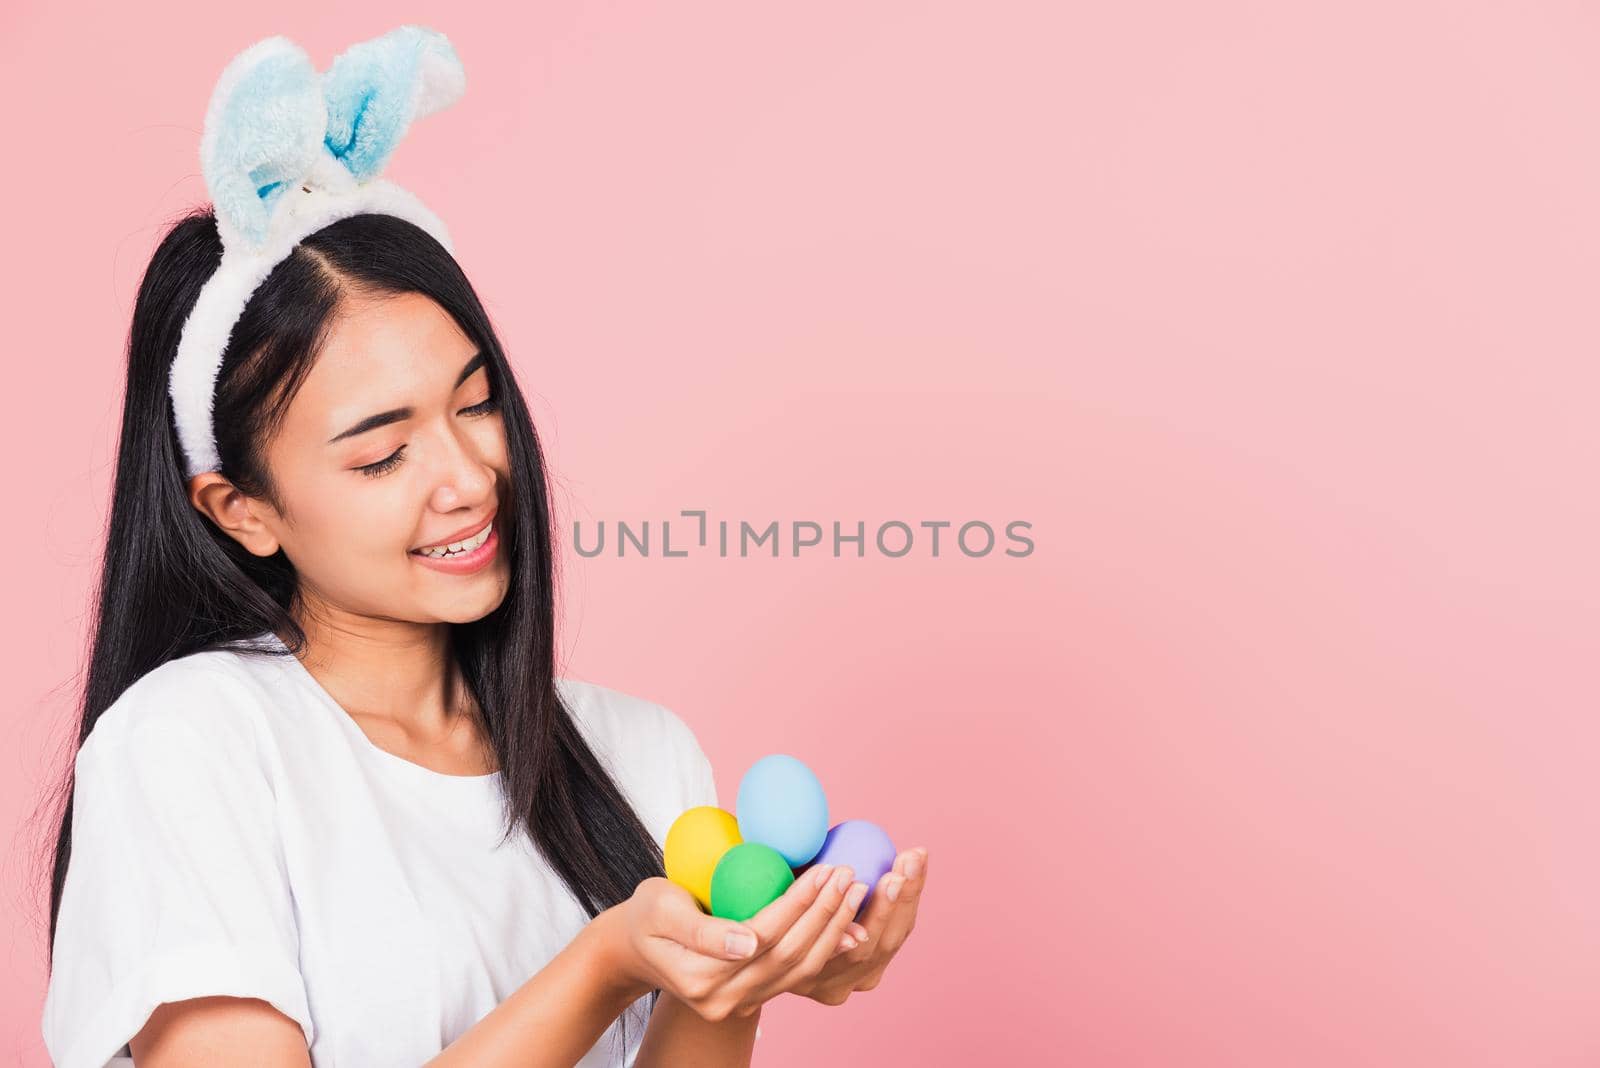 Happy Easter concept. Beautiful young woman smiling wearing rabbit ears holding colorful Easter eggs gift on hands, Portrait female looking at eggs, studio shot isolated on pink background